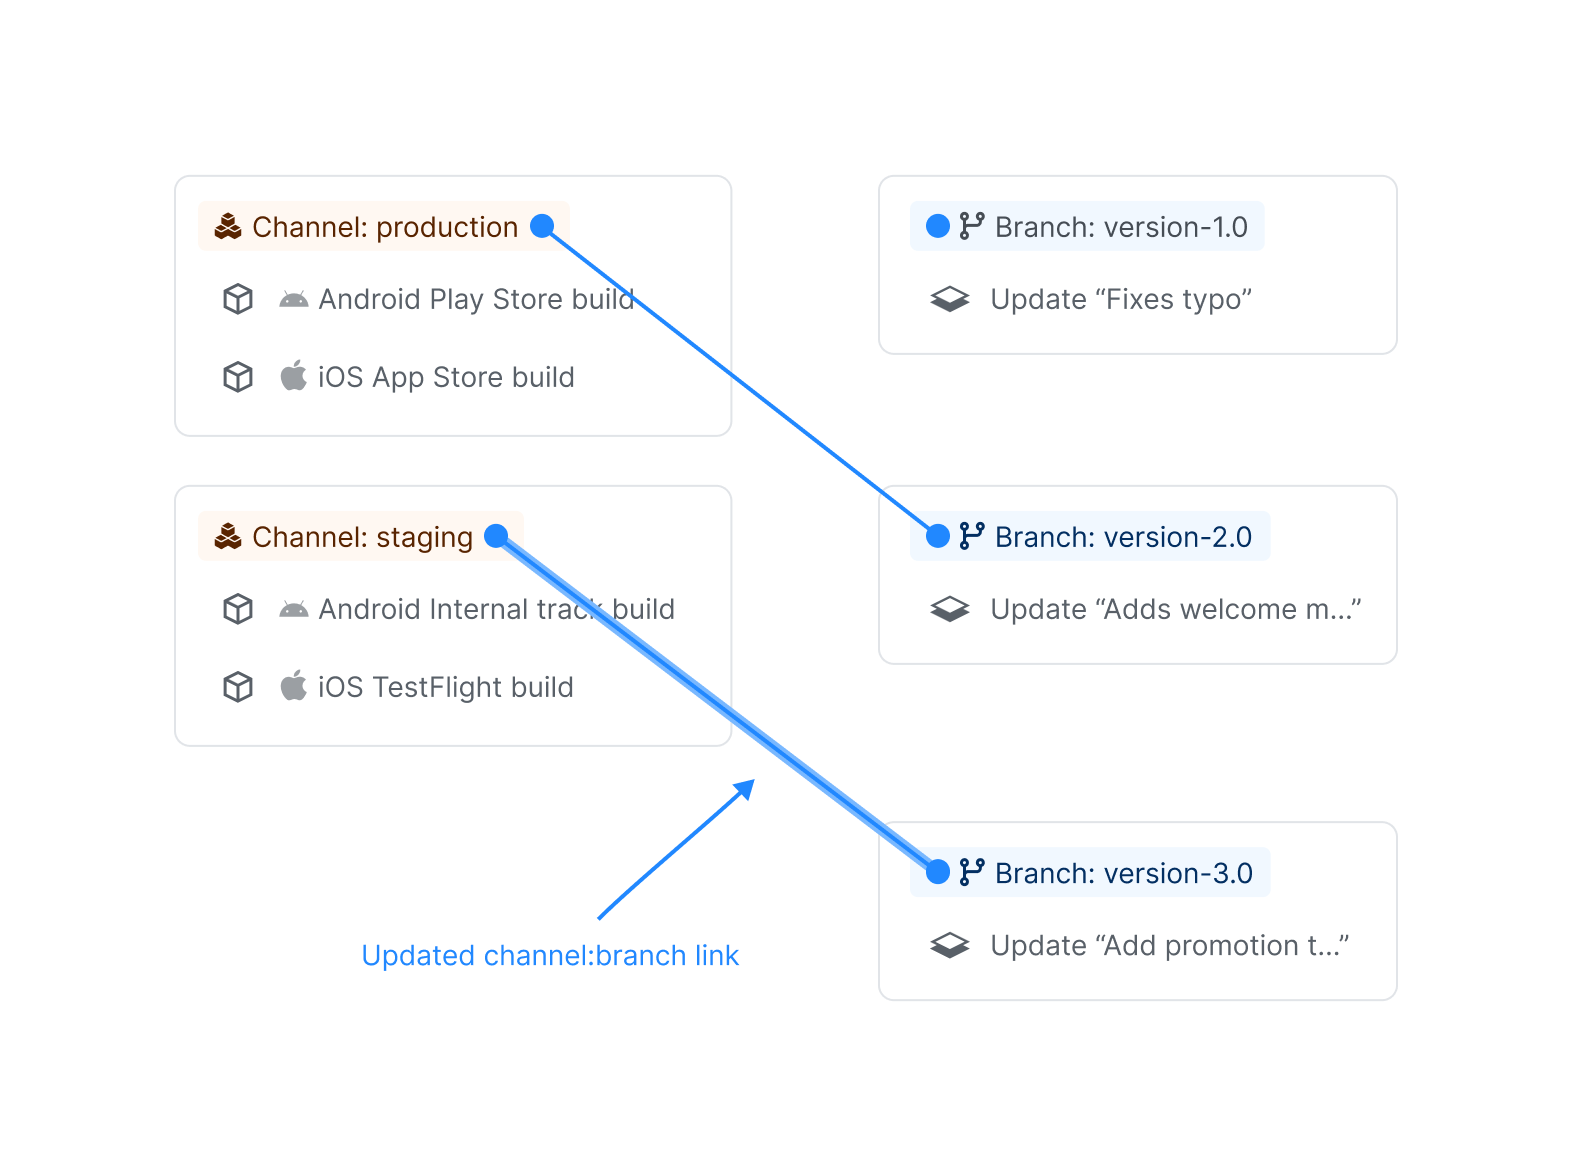 Channel "production" linked to branch "version-2.0", channel "staging" linked to branch "version-3.0"